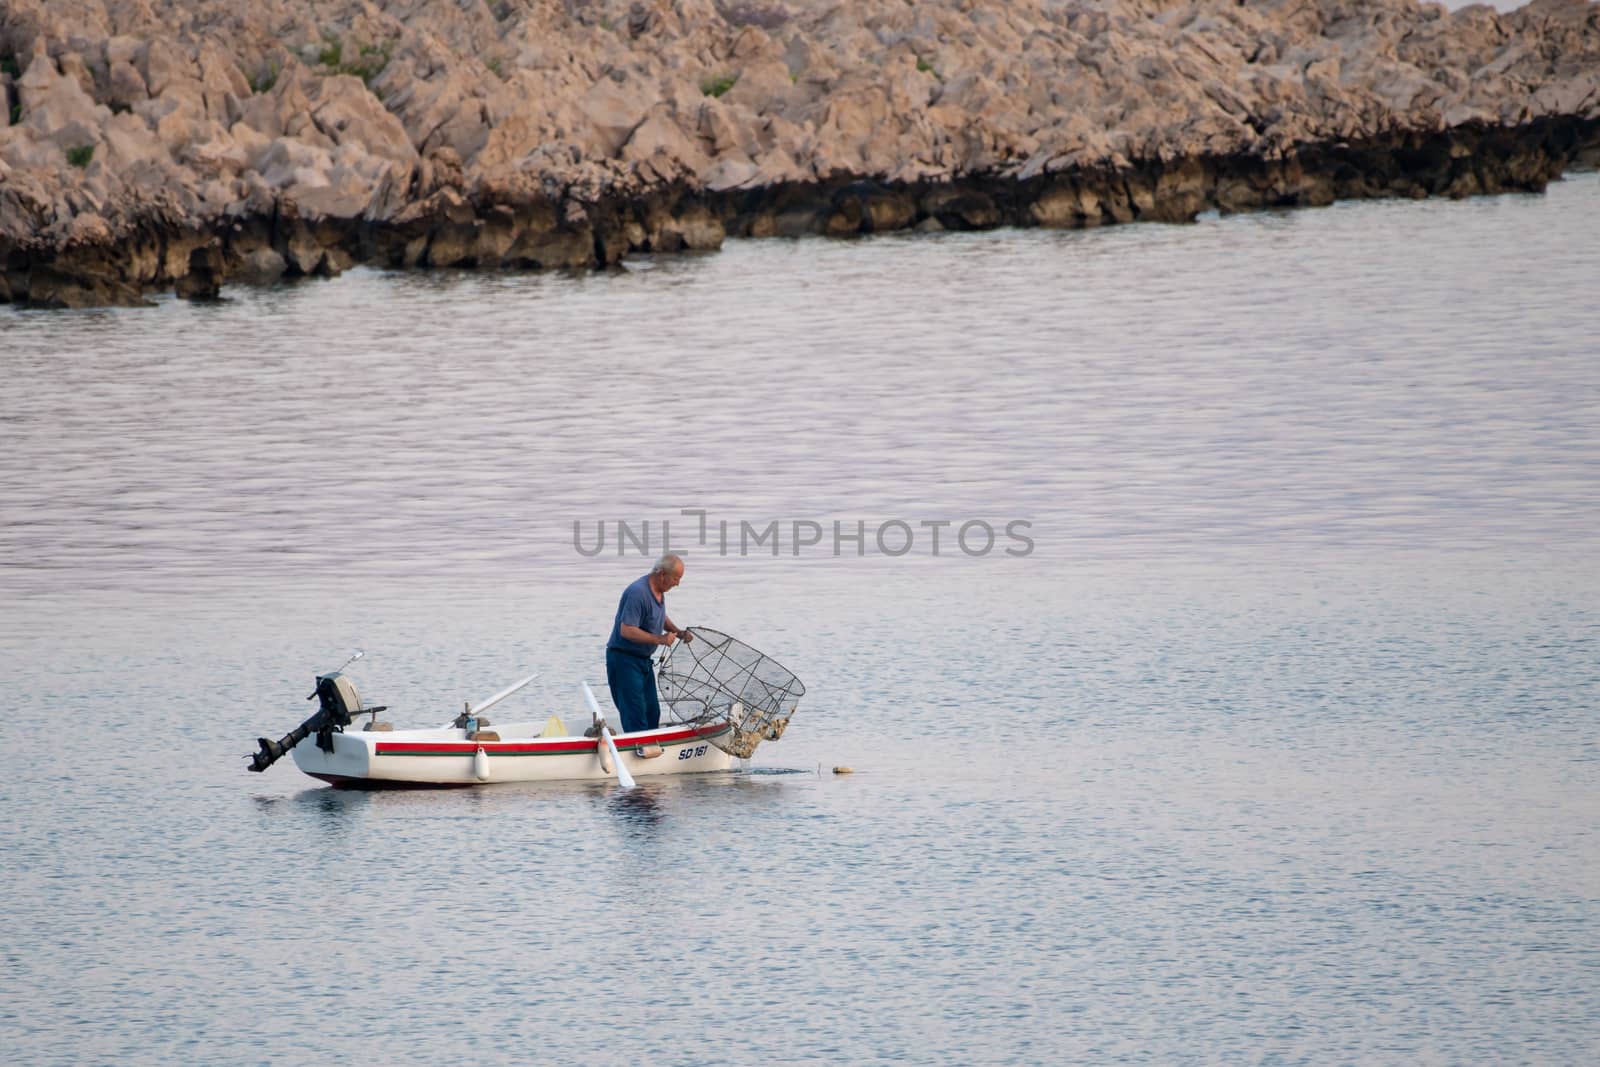 Old traditional fisherman in Croatia on a small wooden boat catching fish with fishing cage, pod by asafaric